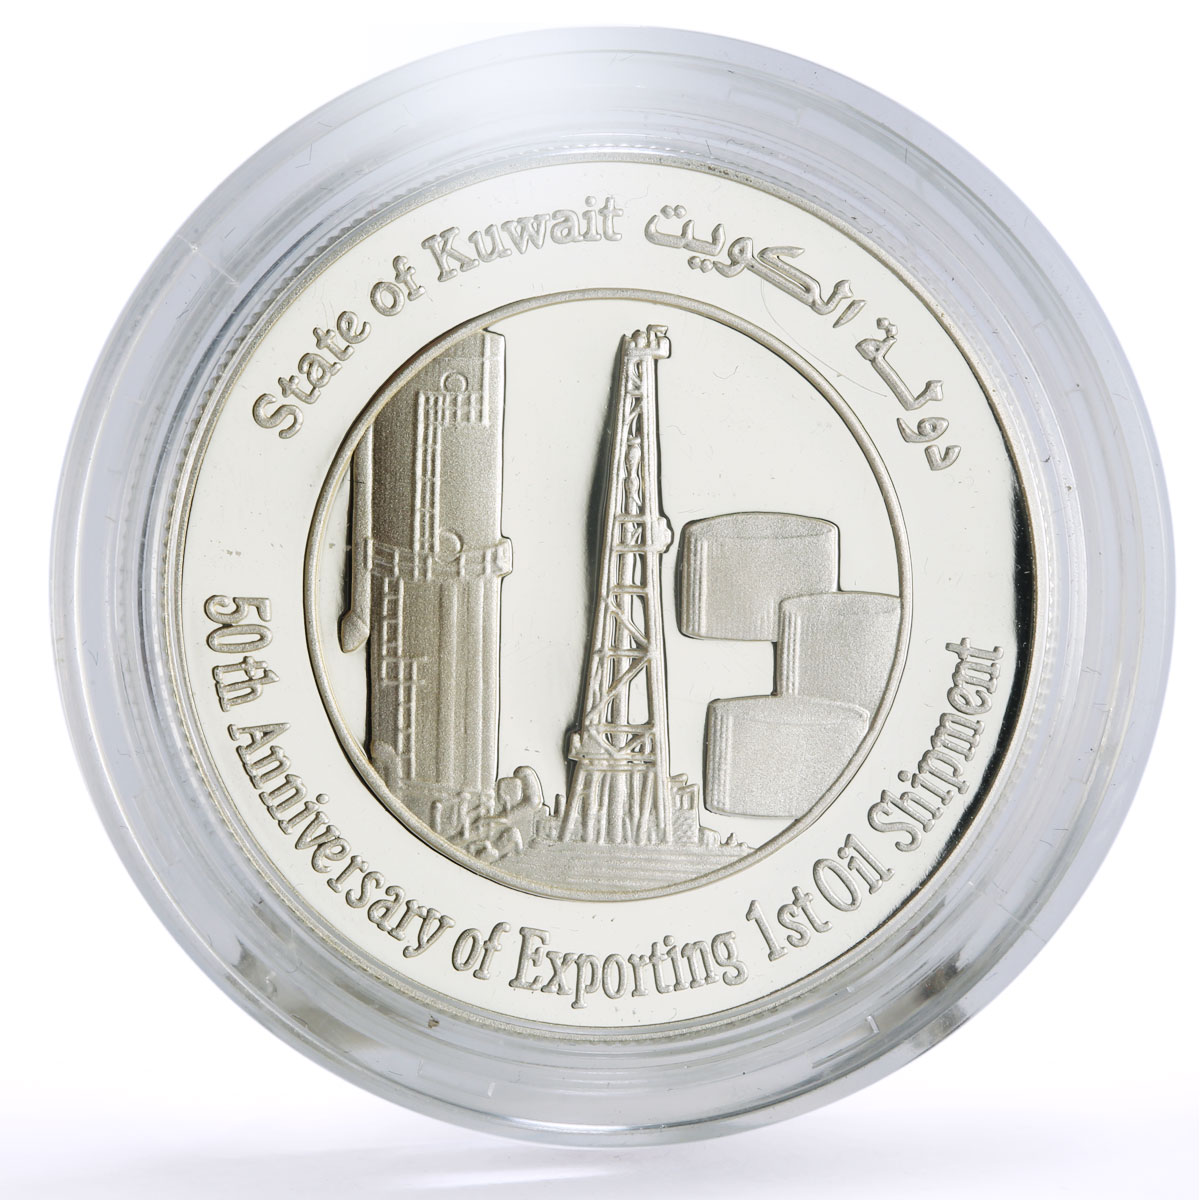 Kuwait 5 dinars 50th Anniversary Oil Shipment Exporting proof silver coin 1996